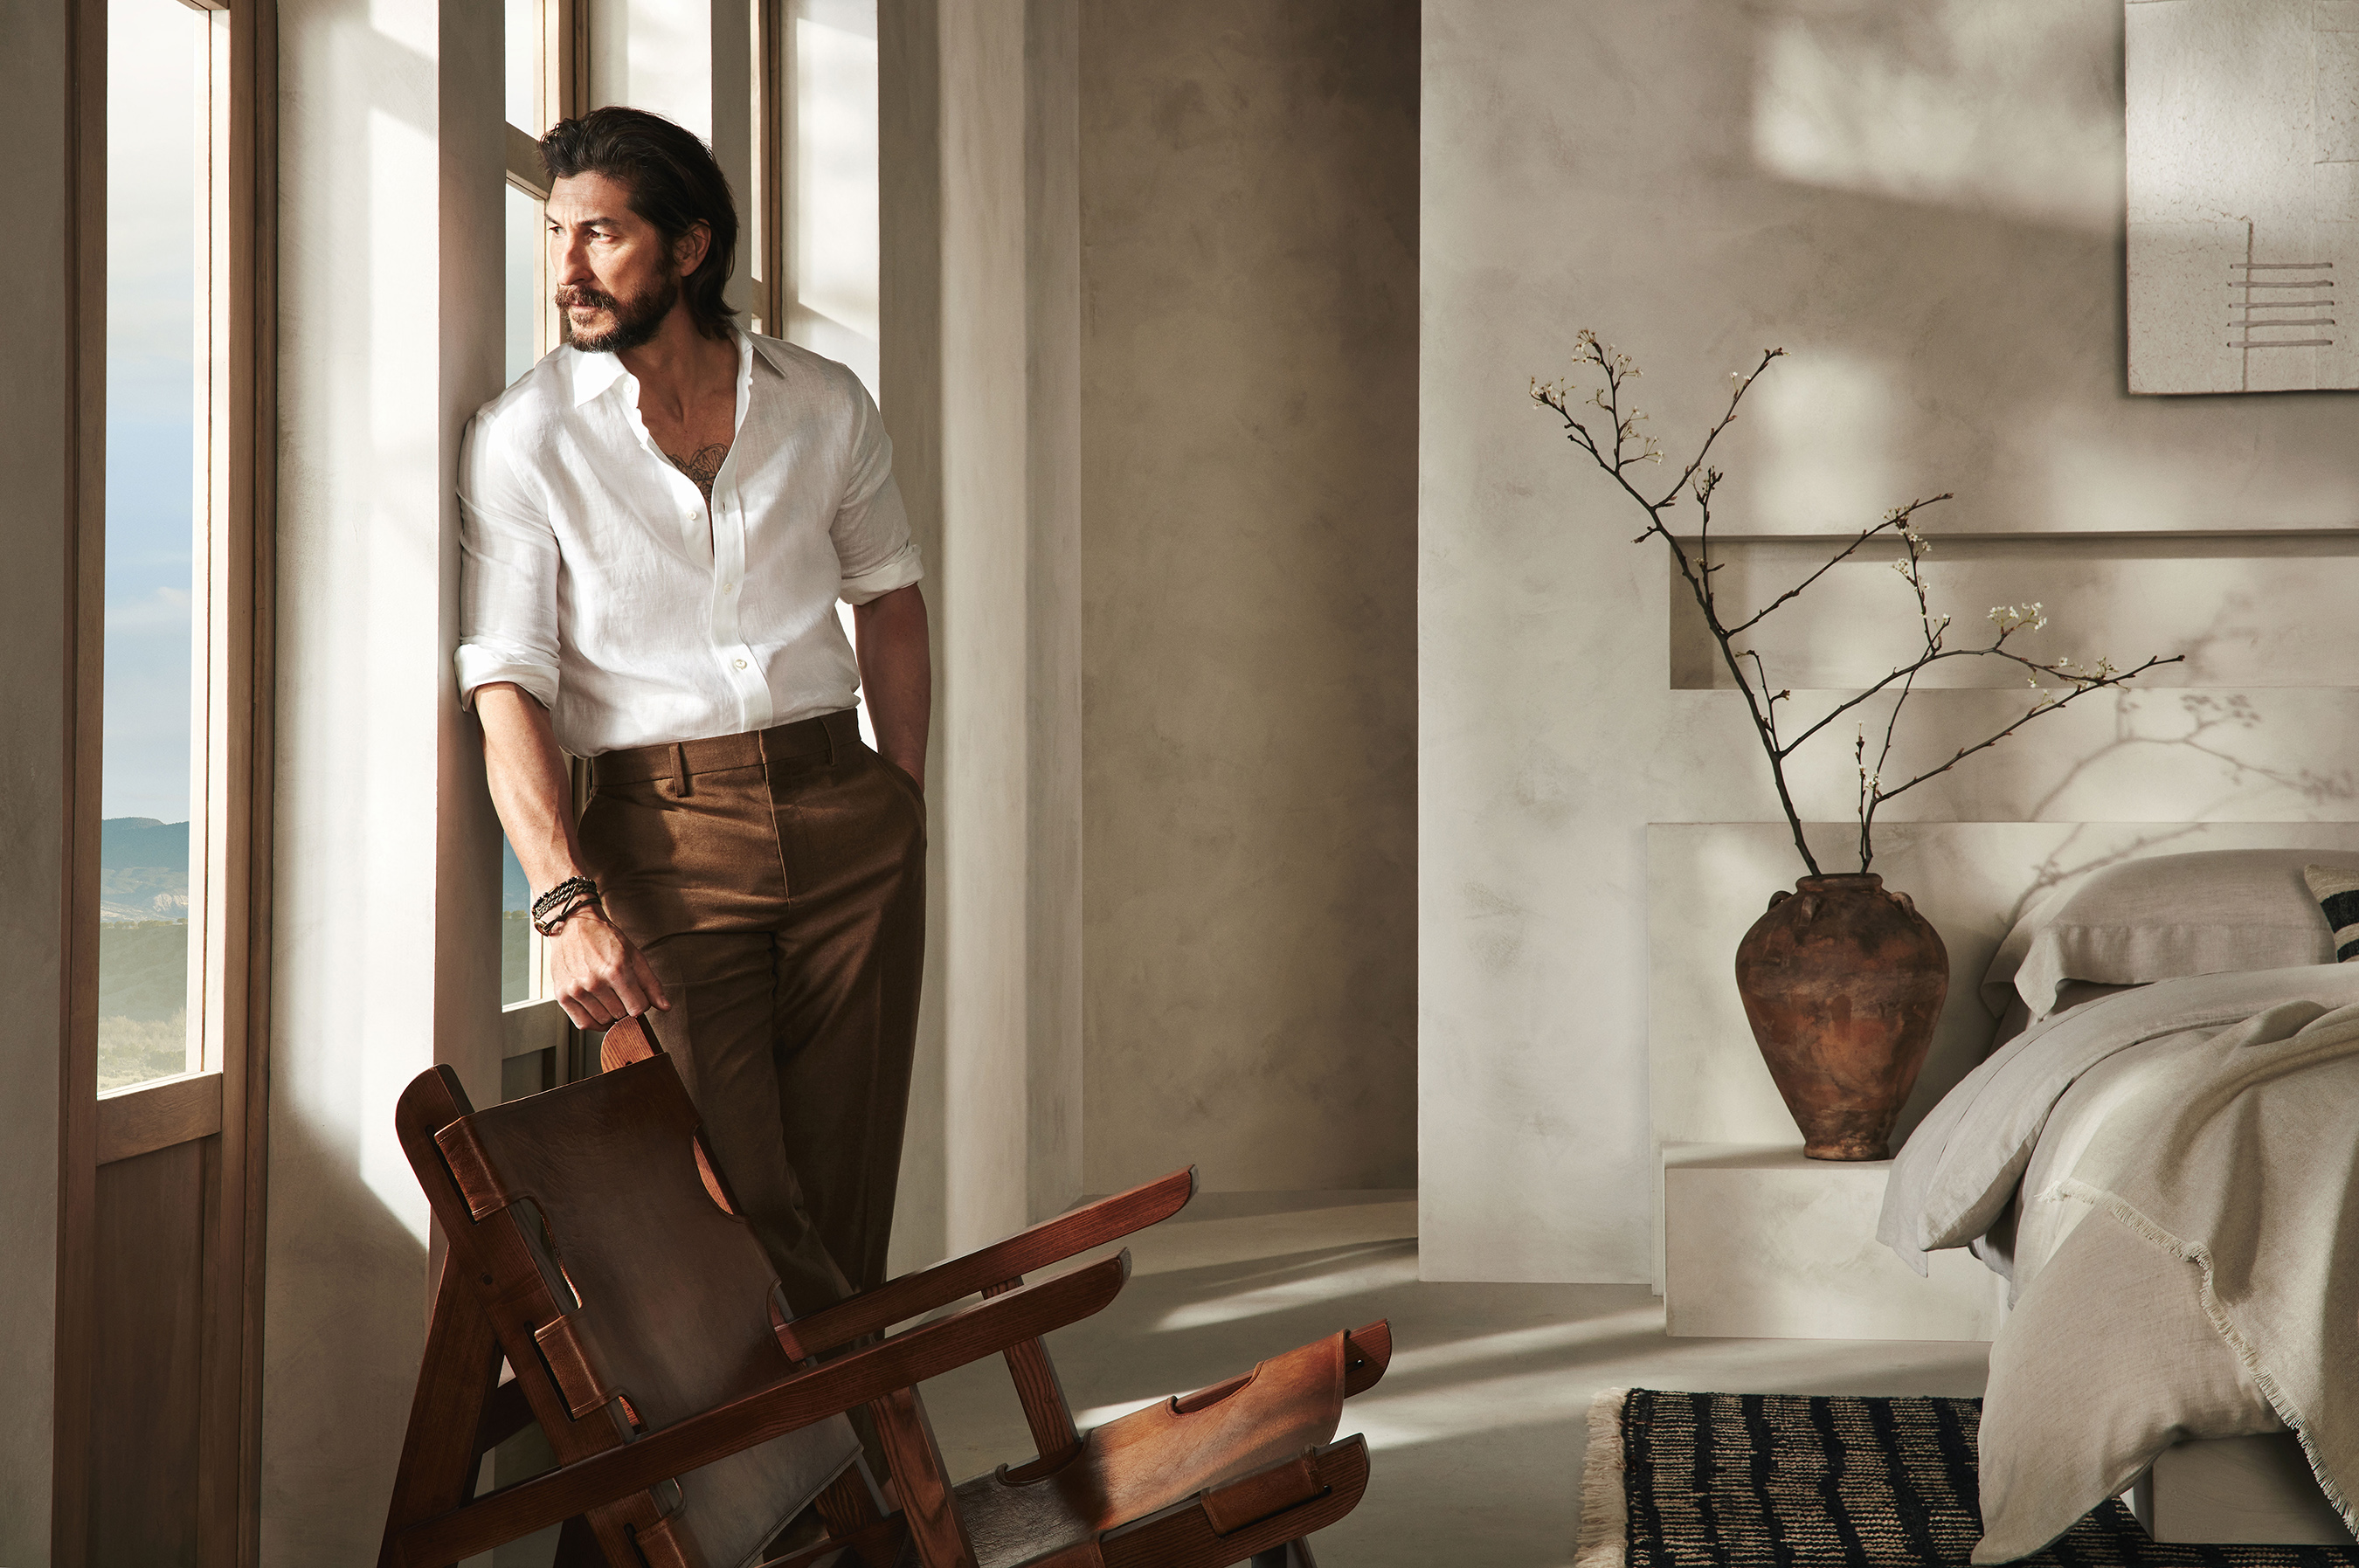 Exclusively created and curated by Banana Republic, the spring collection from BR Home features extraordinary home textiles exquisitely crafted by global artisans.